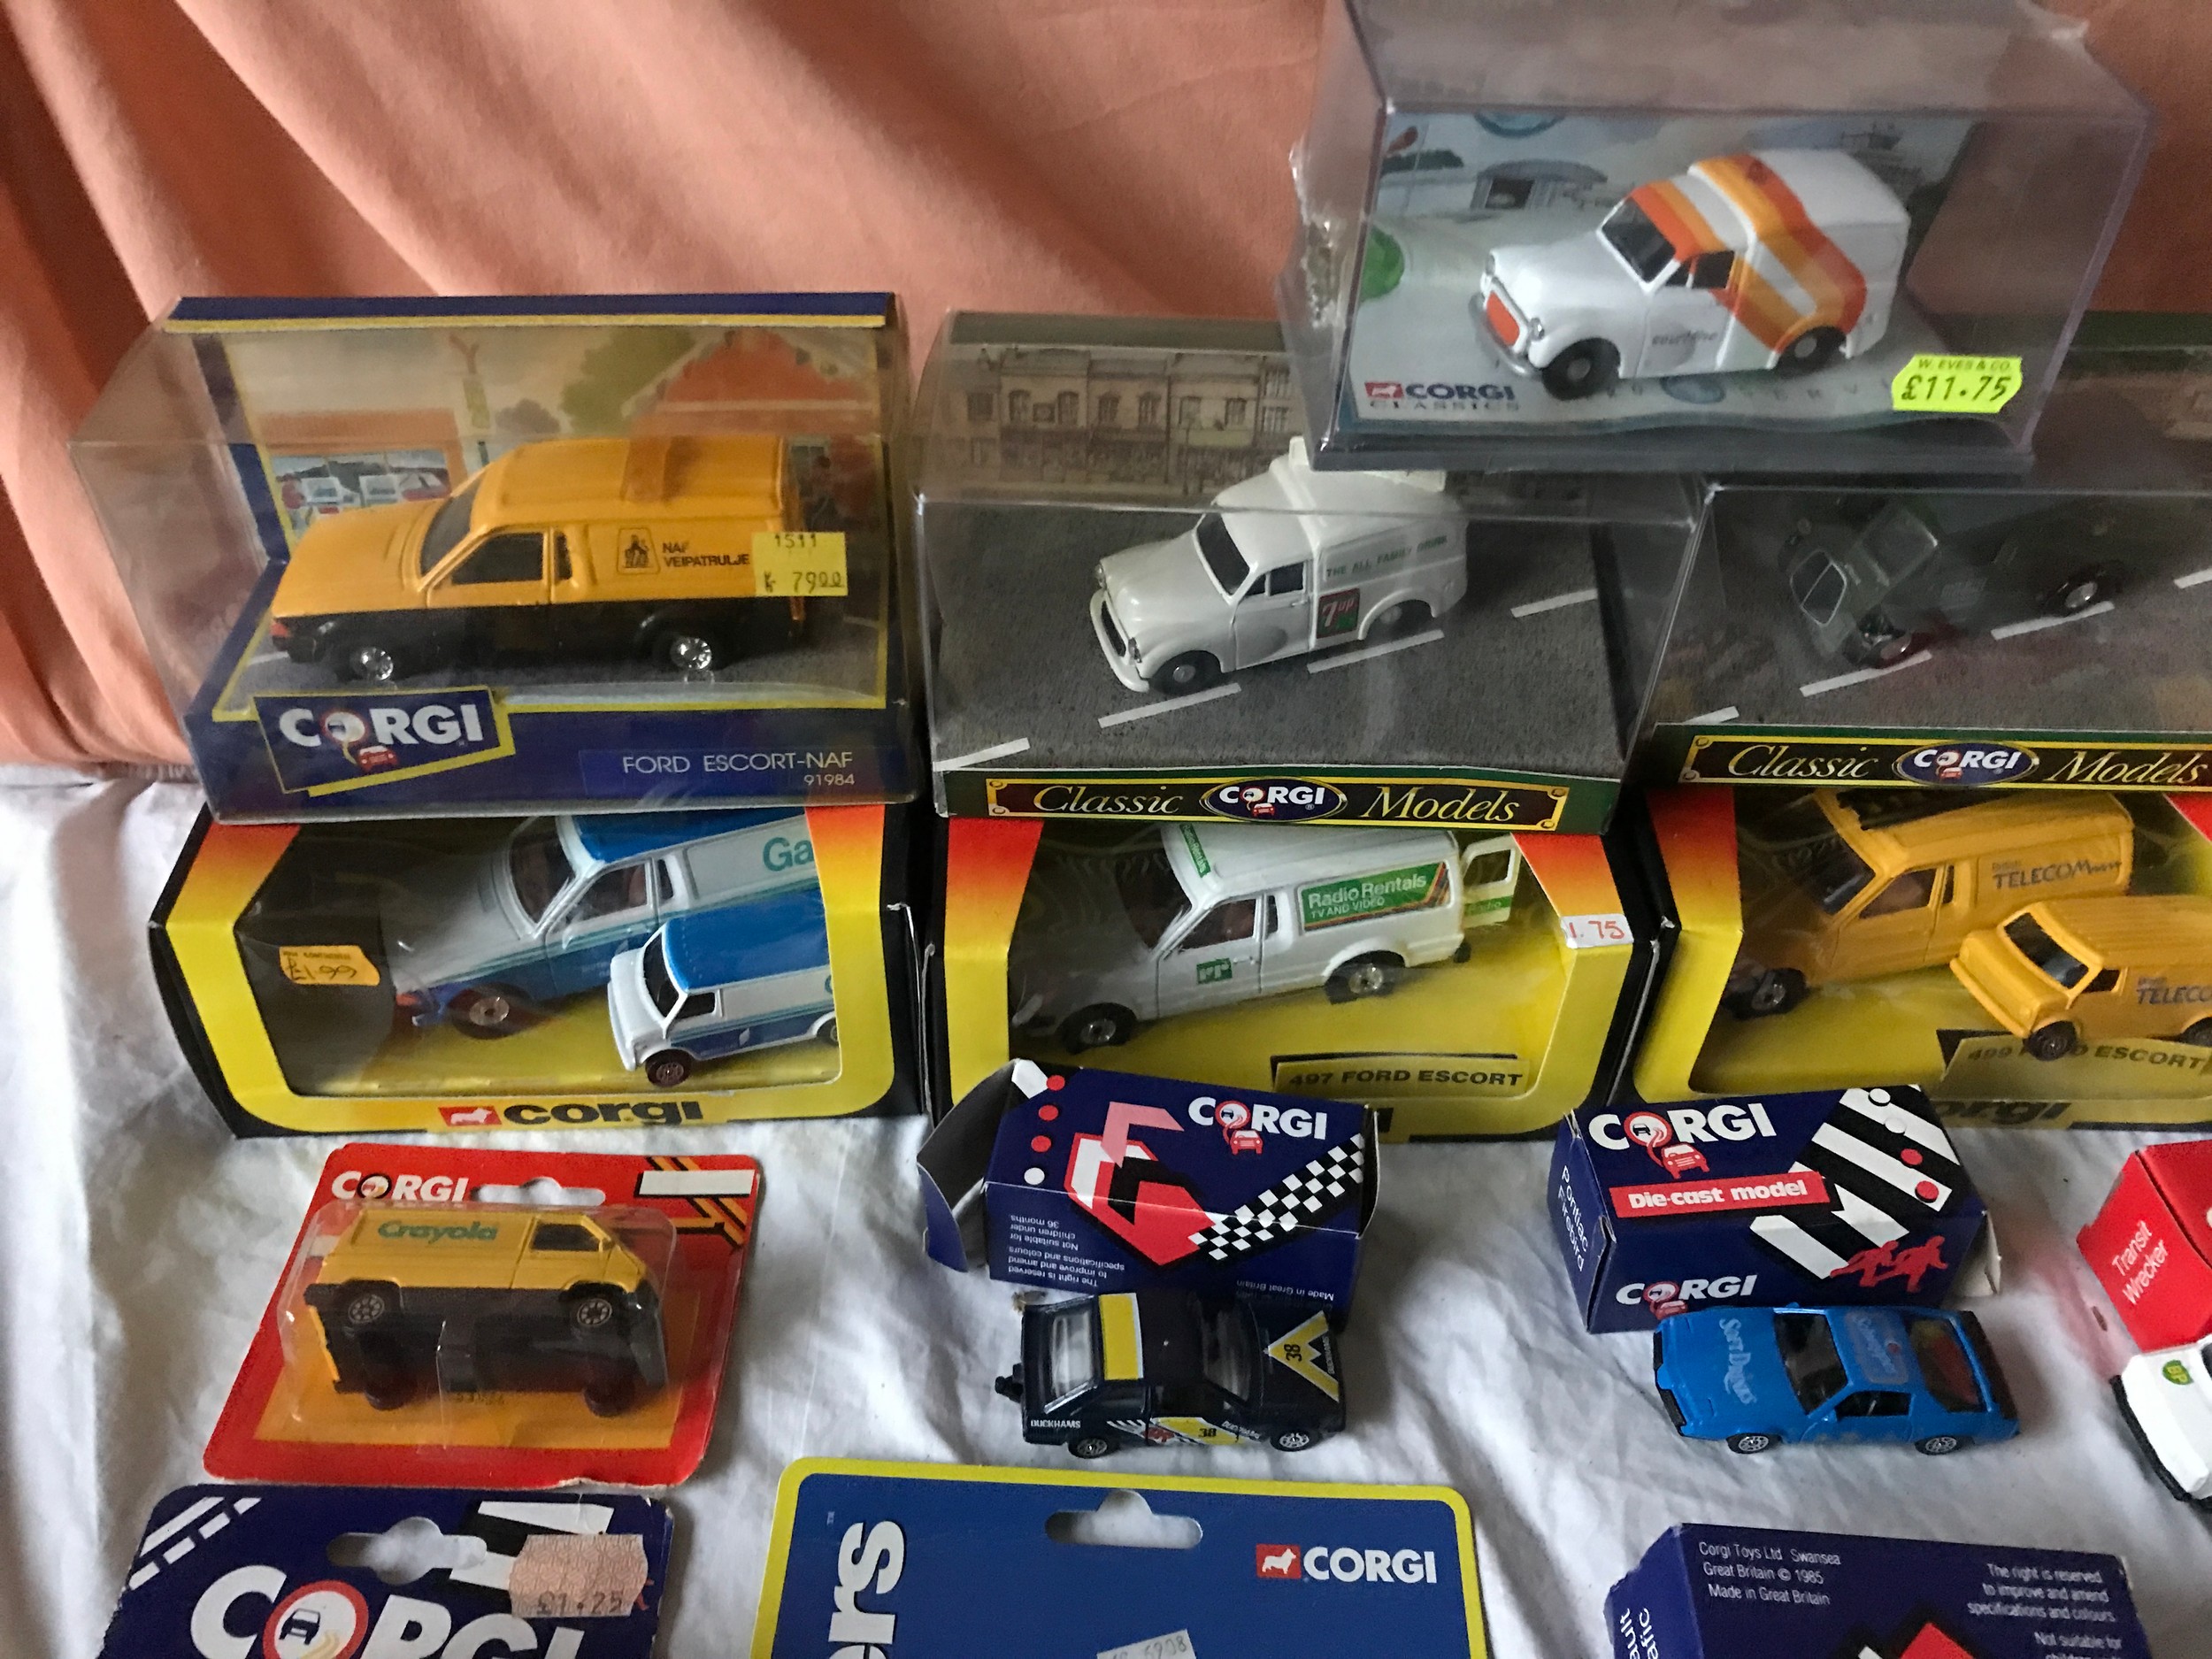 Corgi diecast model vans and cars collection of 38 assorted models, all boxed with no playwear, - Image 4 of 8